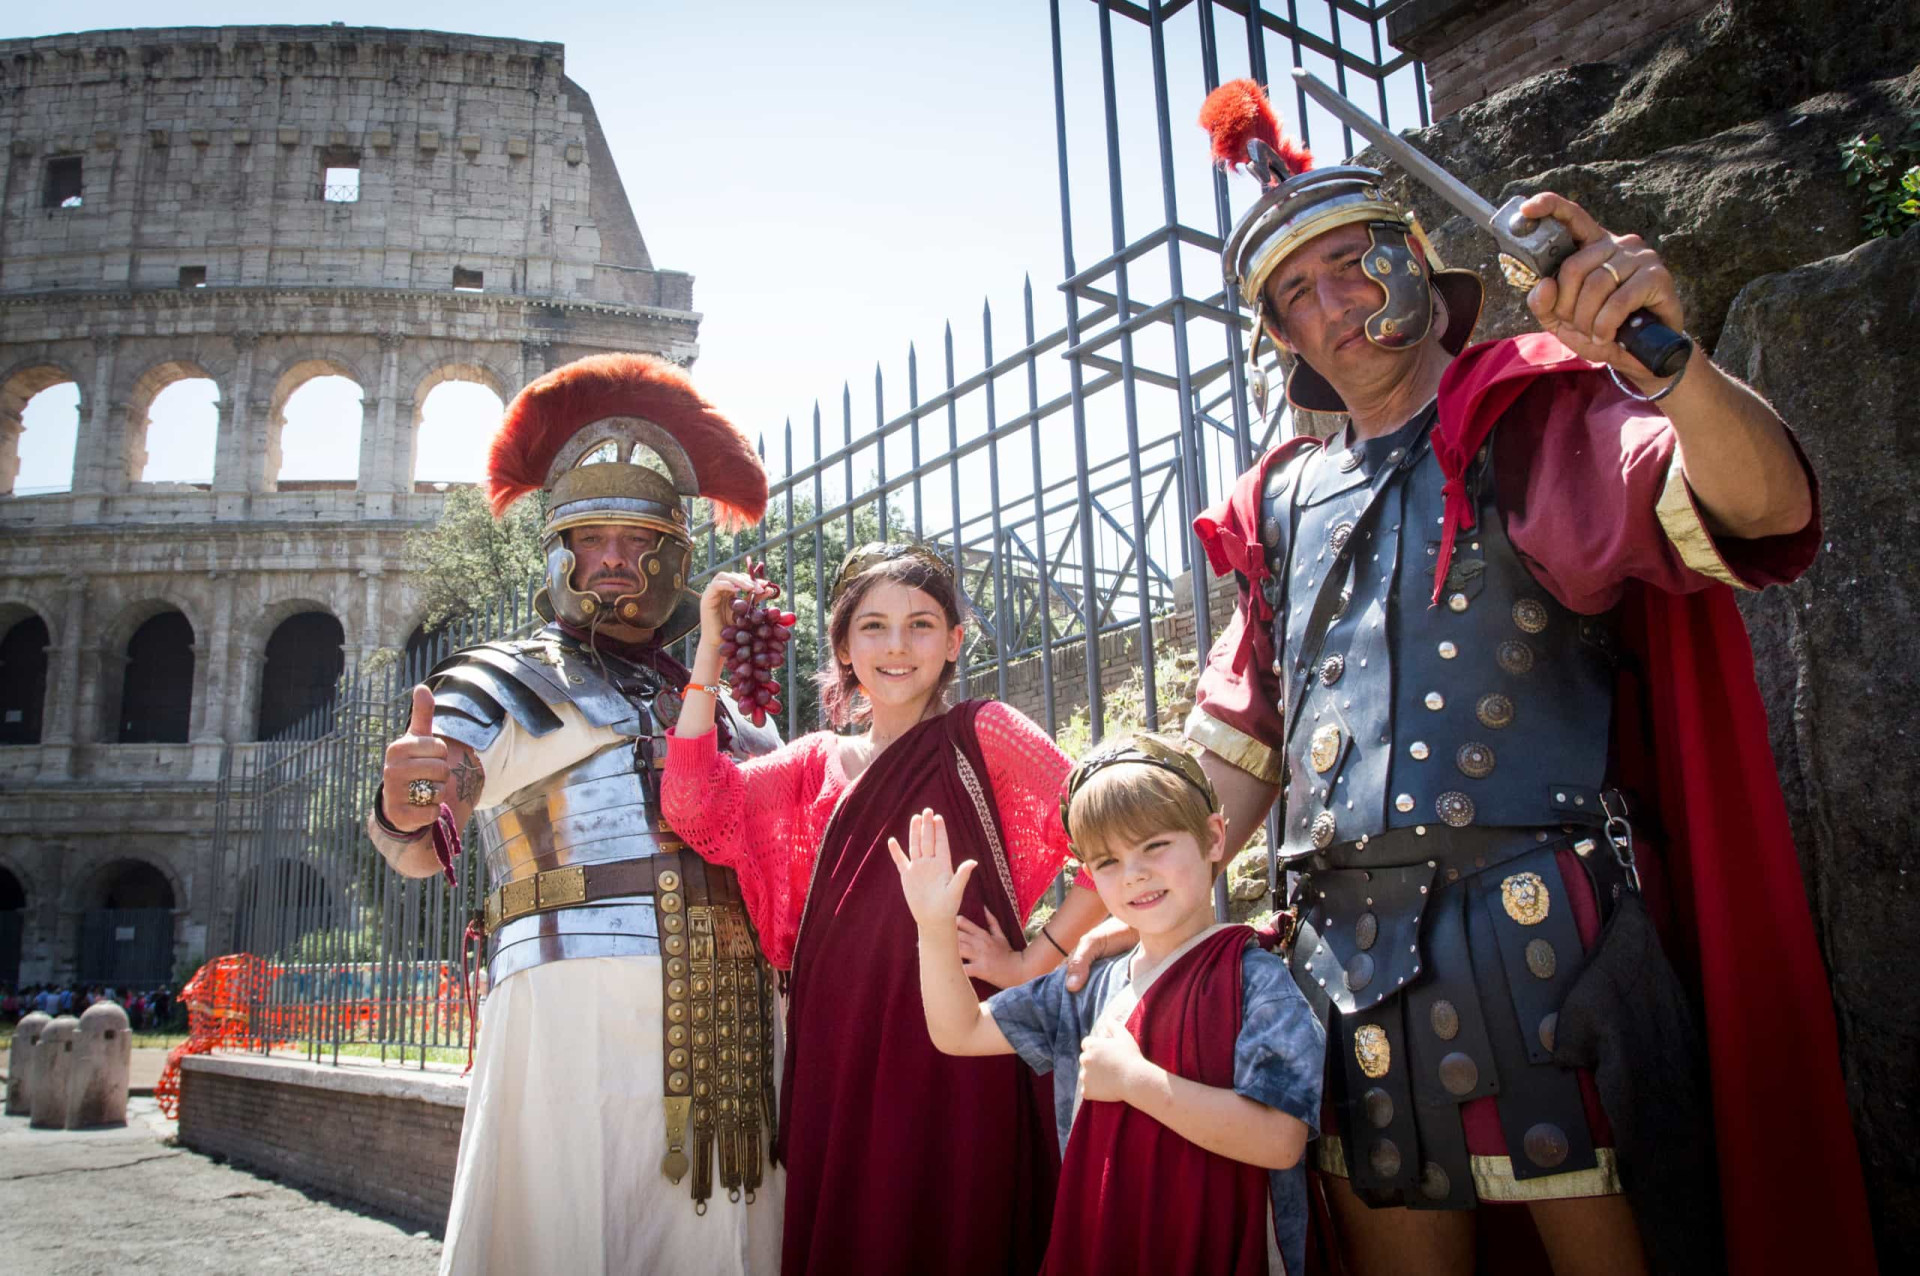 <p>Kids of toddler-age and above will love the opportunity to step right into Rome's fascinating history at the Coliseum and see the home of the pope at Vatican City, plus the abundant ice cream is a delicious way for the whole family to cool down after a hot day's sightseeing.  </p><p>You may also like:<a href="https://www.starsinsider.com/n/334439?utm_source=msn.com&utm_medium=display&utm_campaign=referral_description&utm_content=481299v3en-en"> Lupus: understand the mysterious disease affecting several celebrities</a></p>